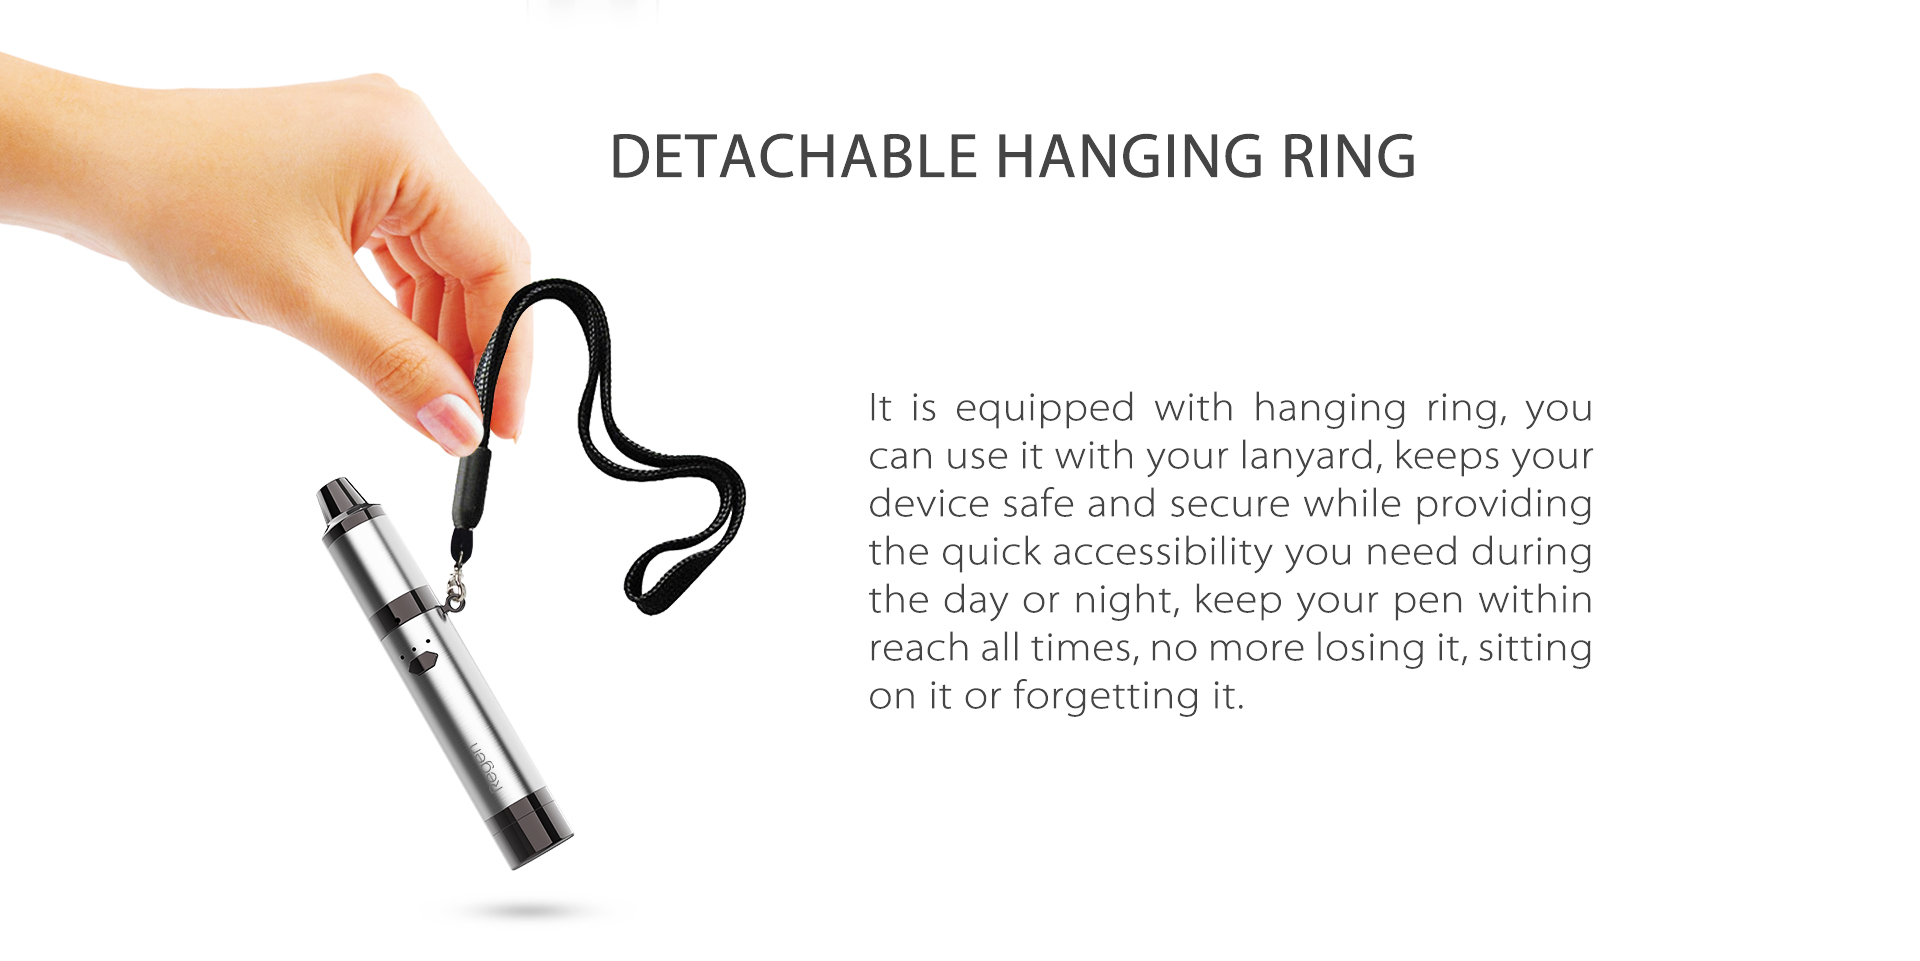 Yocan Regen vaporizer pen equipped with hanging ring, you can use it with your lanyard.